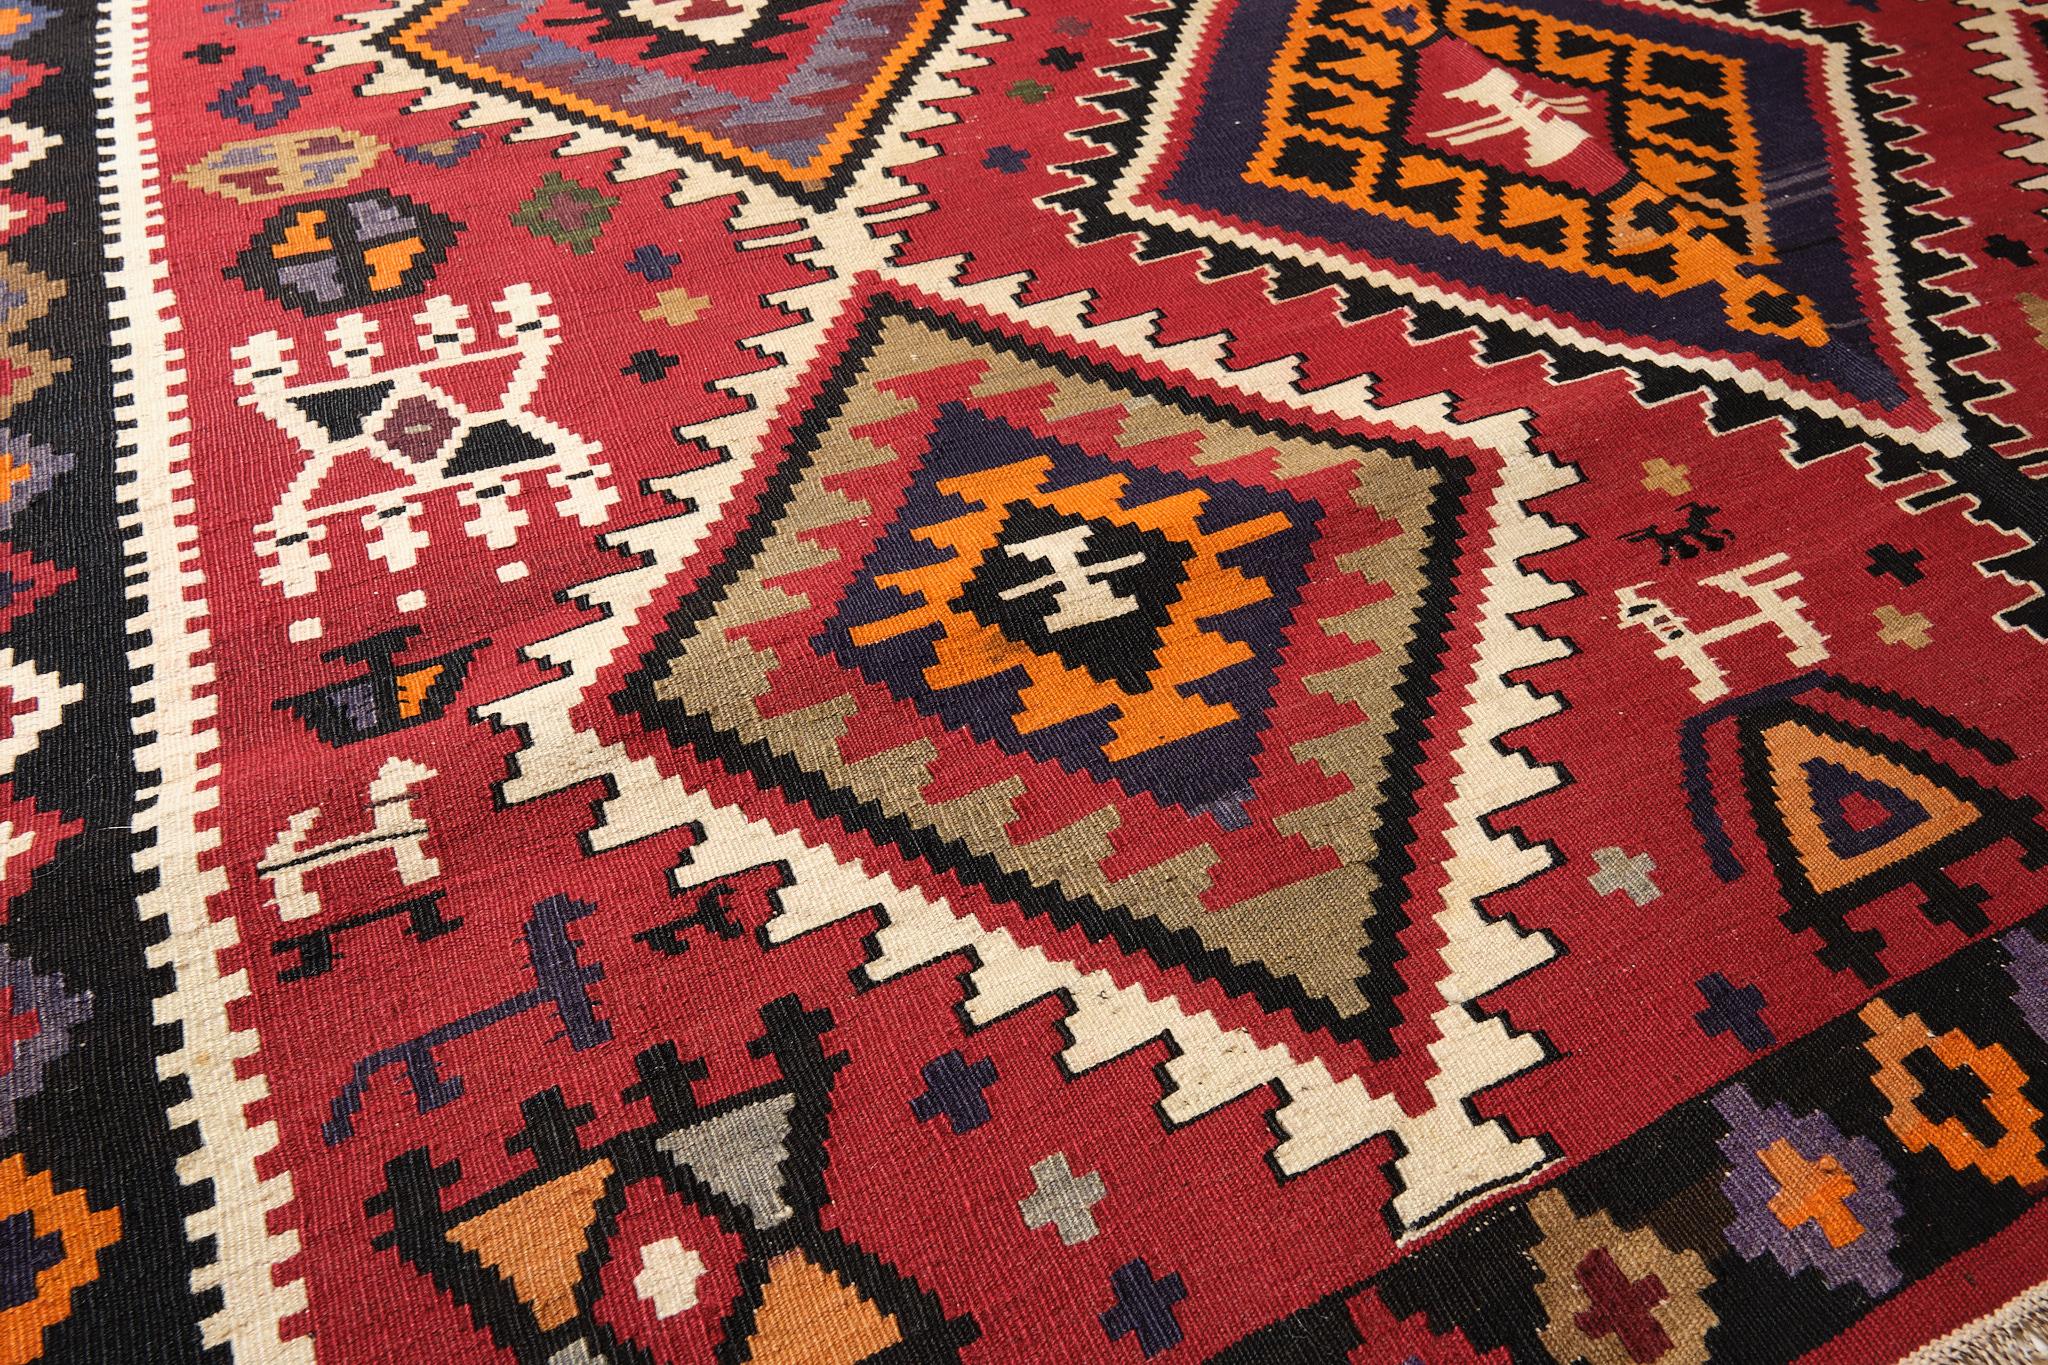 This is a large, Caucasian Old Kilim from the Kuba region with a red background and beautiful color composition.

Kuba kilims are often decorated with large abstract indented medallions arranged in a well-organized format, and this composition